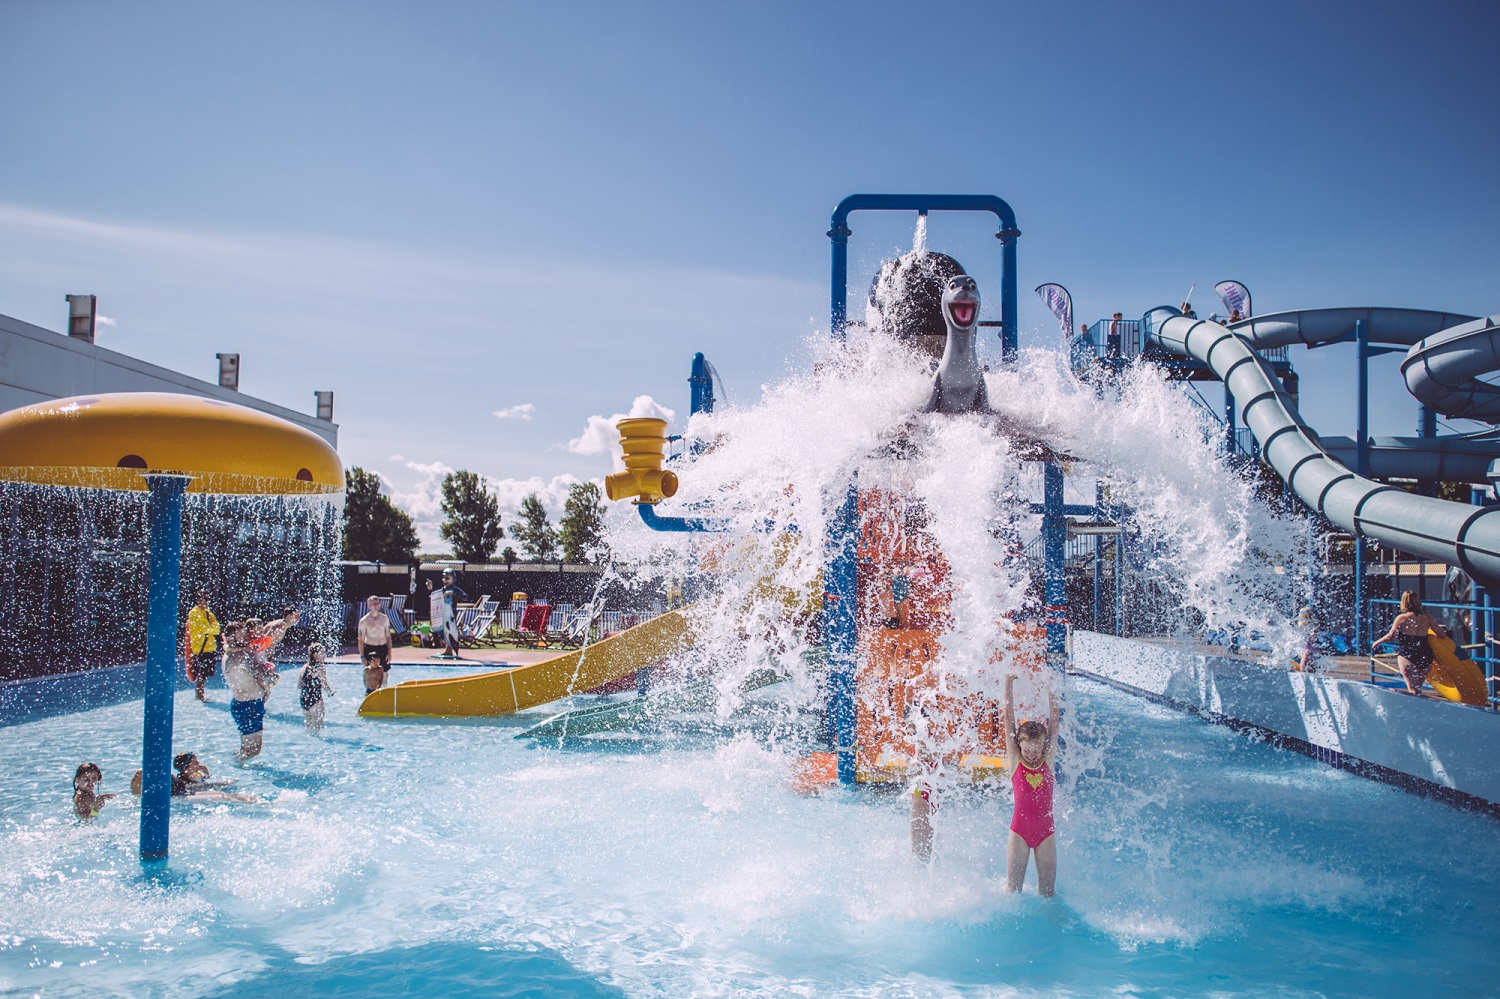 Brean Leisure Park in Somerset was named Water Leisure Venue of the Year at the 2016 UK Pool & Spa Awards.